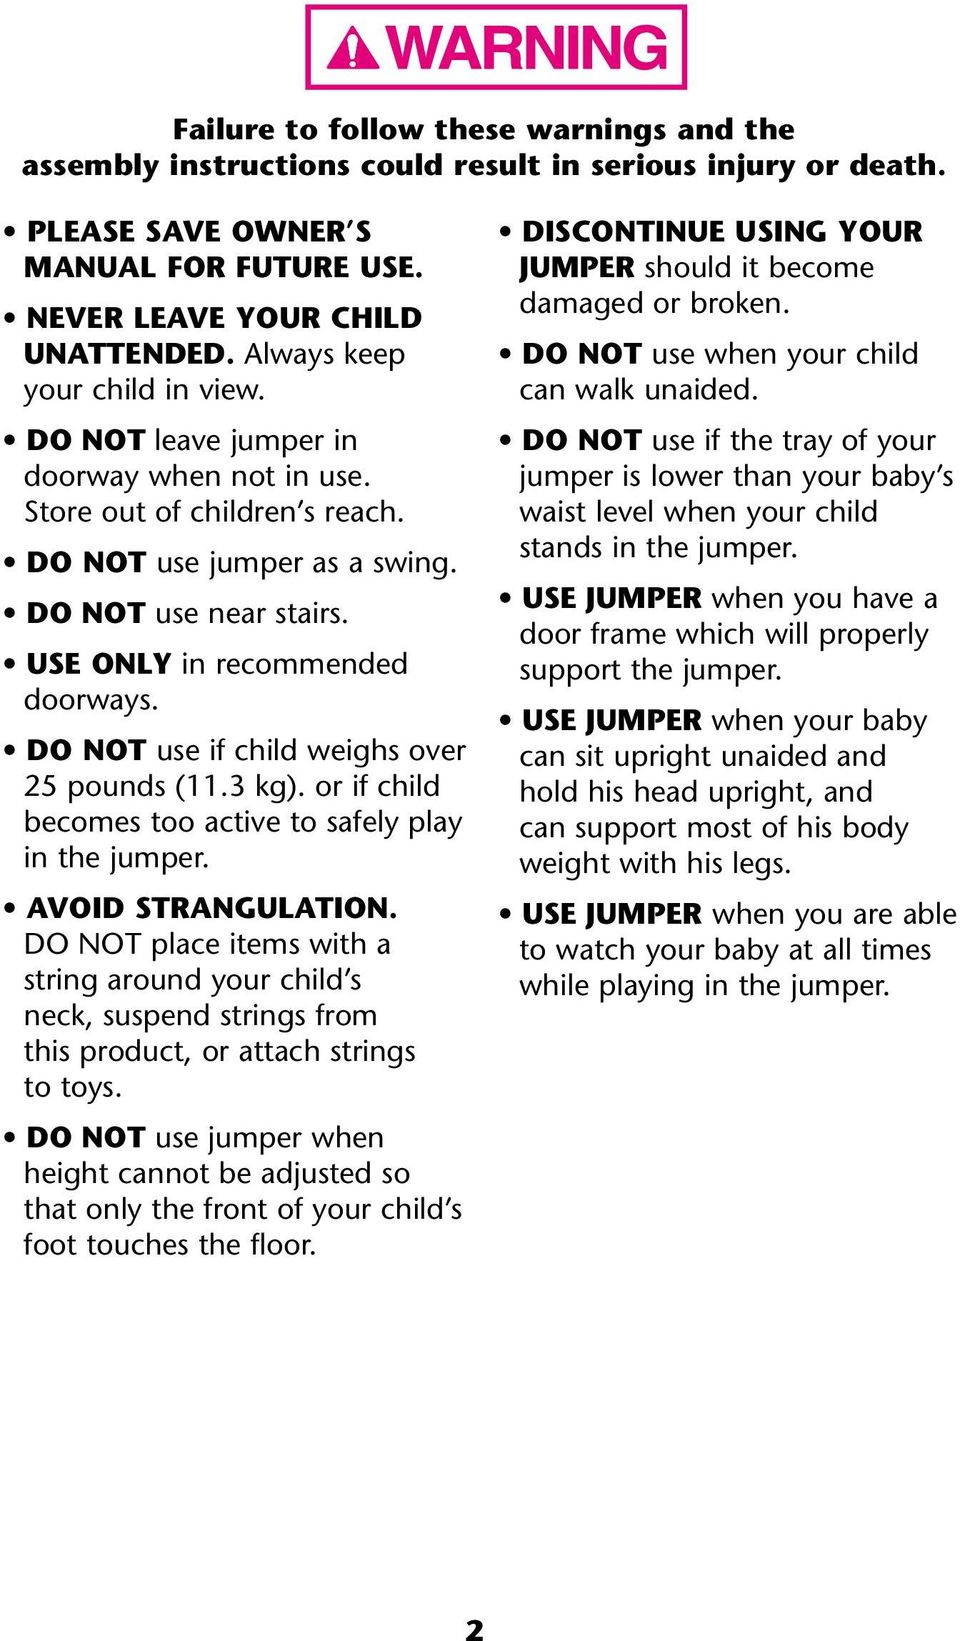 DO NOT use if child weighs over 25 pounds (11.3 kg). or if child becomes too active to safely play in the jumper. AVOID STRANGULATION.